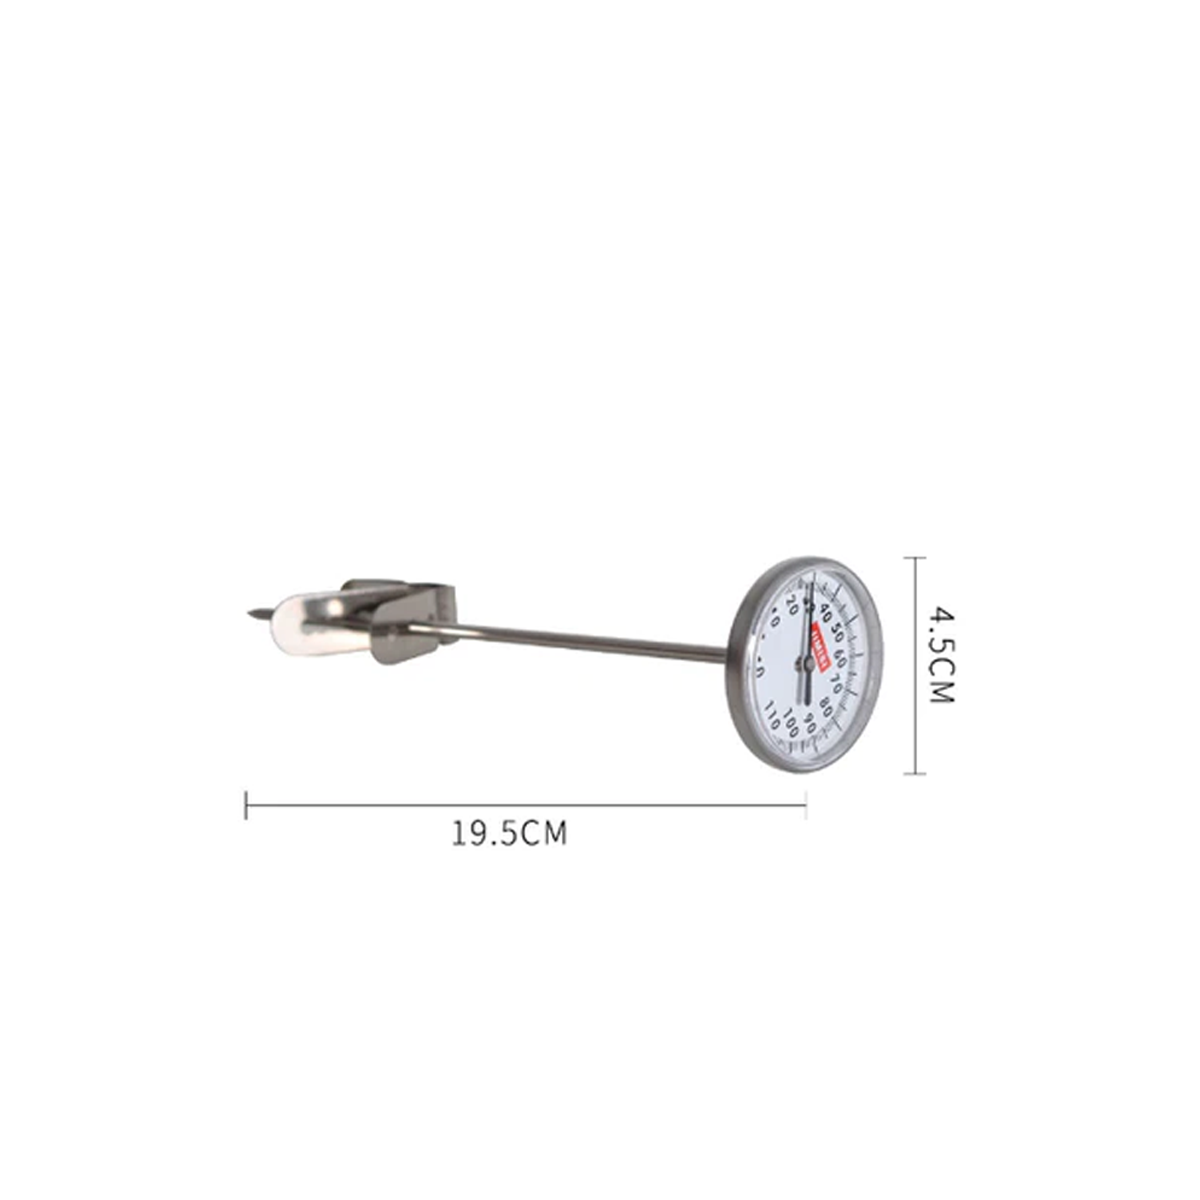 BARISTA SPACE MILK FROTHING / COFFEE THERMOMETER